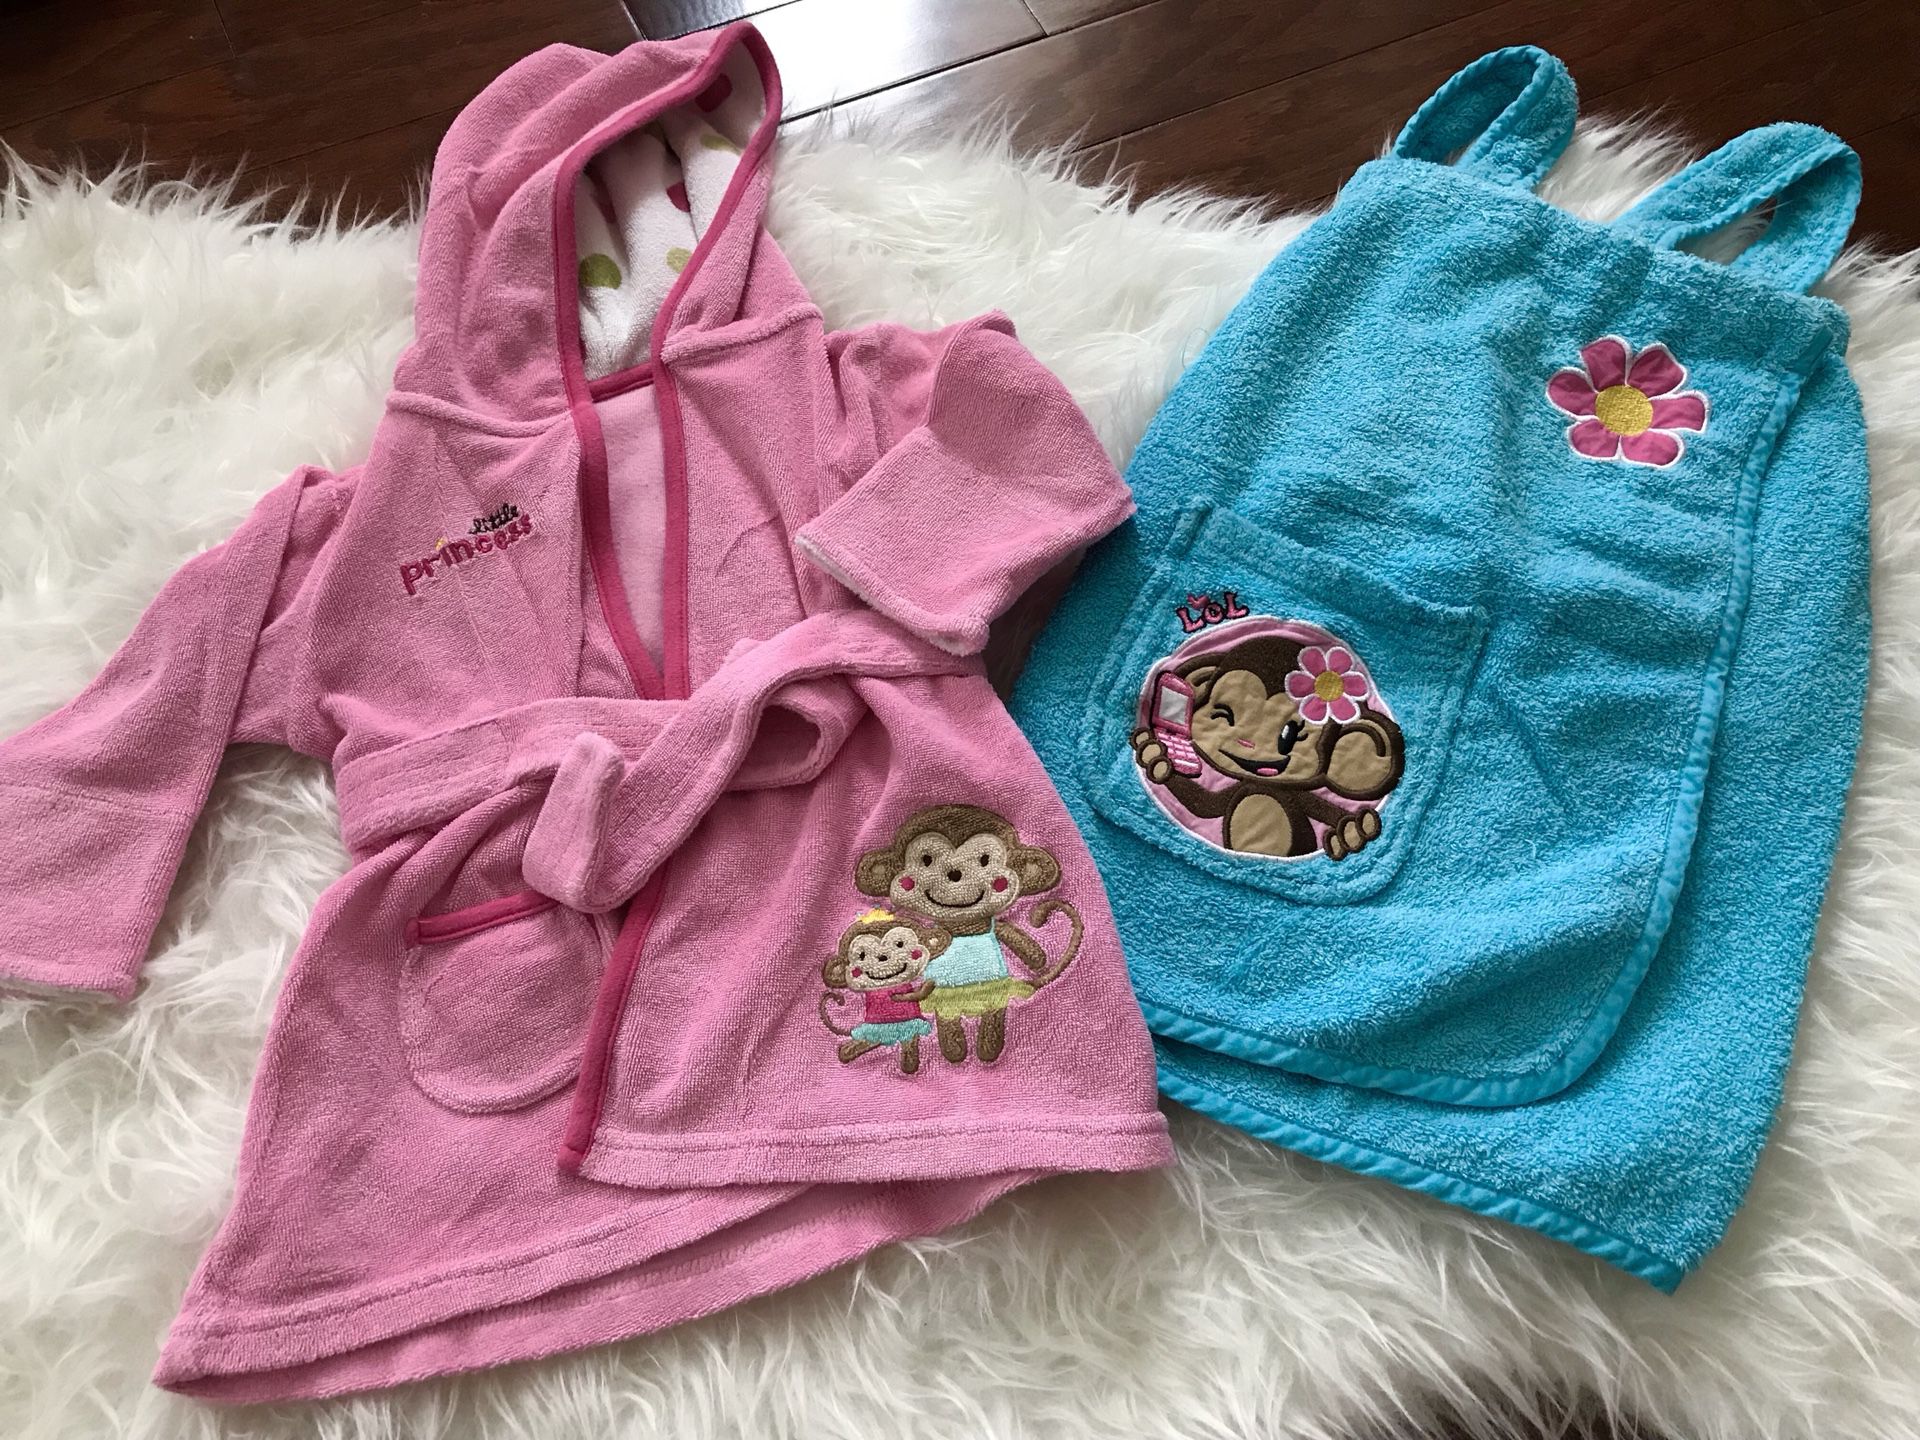 Baby Clothes - Bath Robes 3-12 months